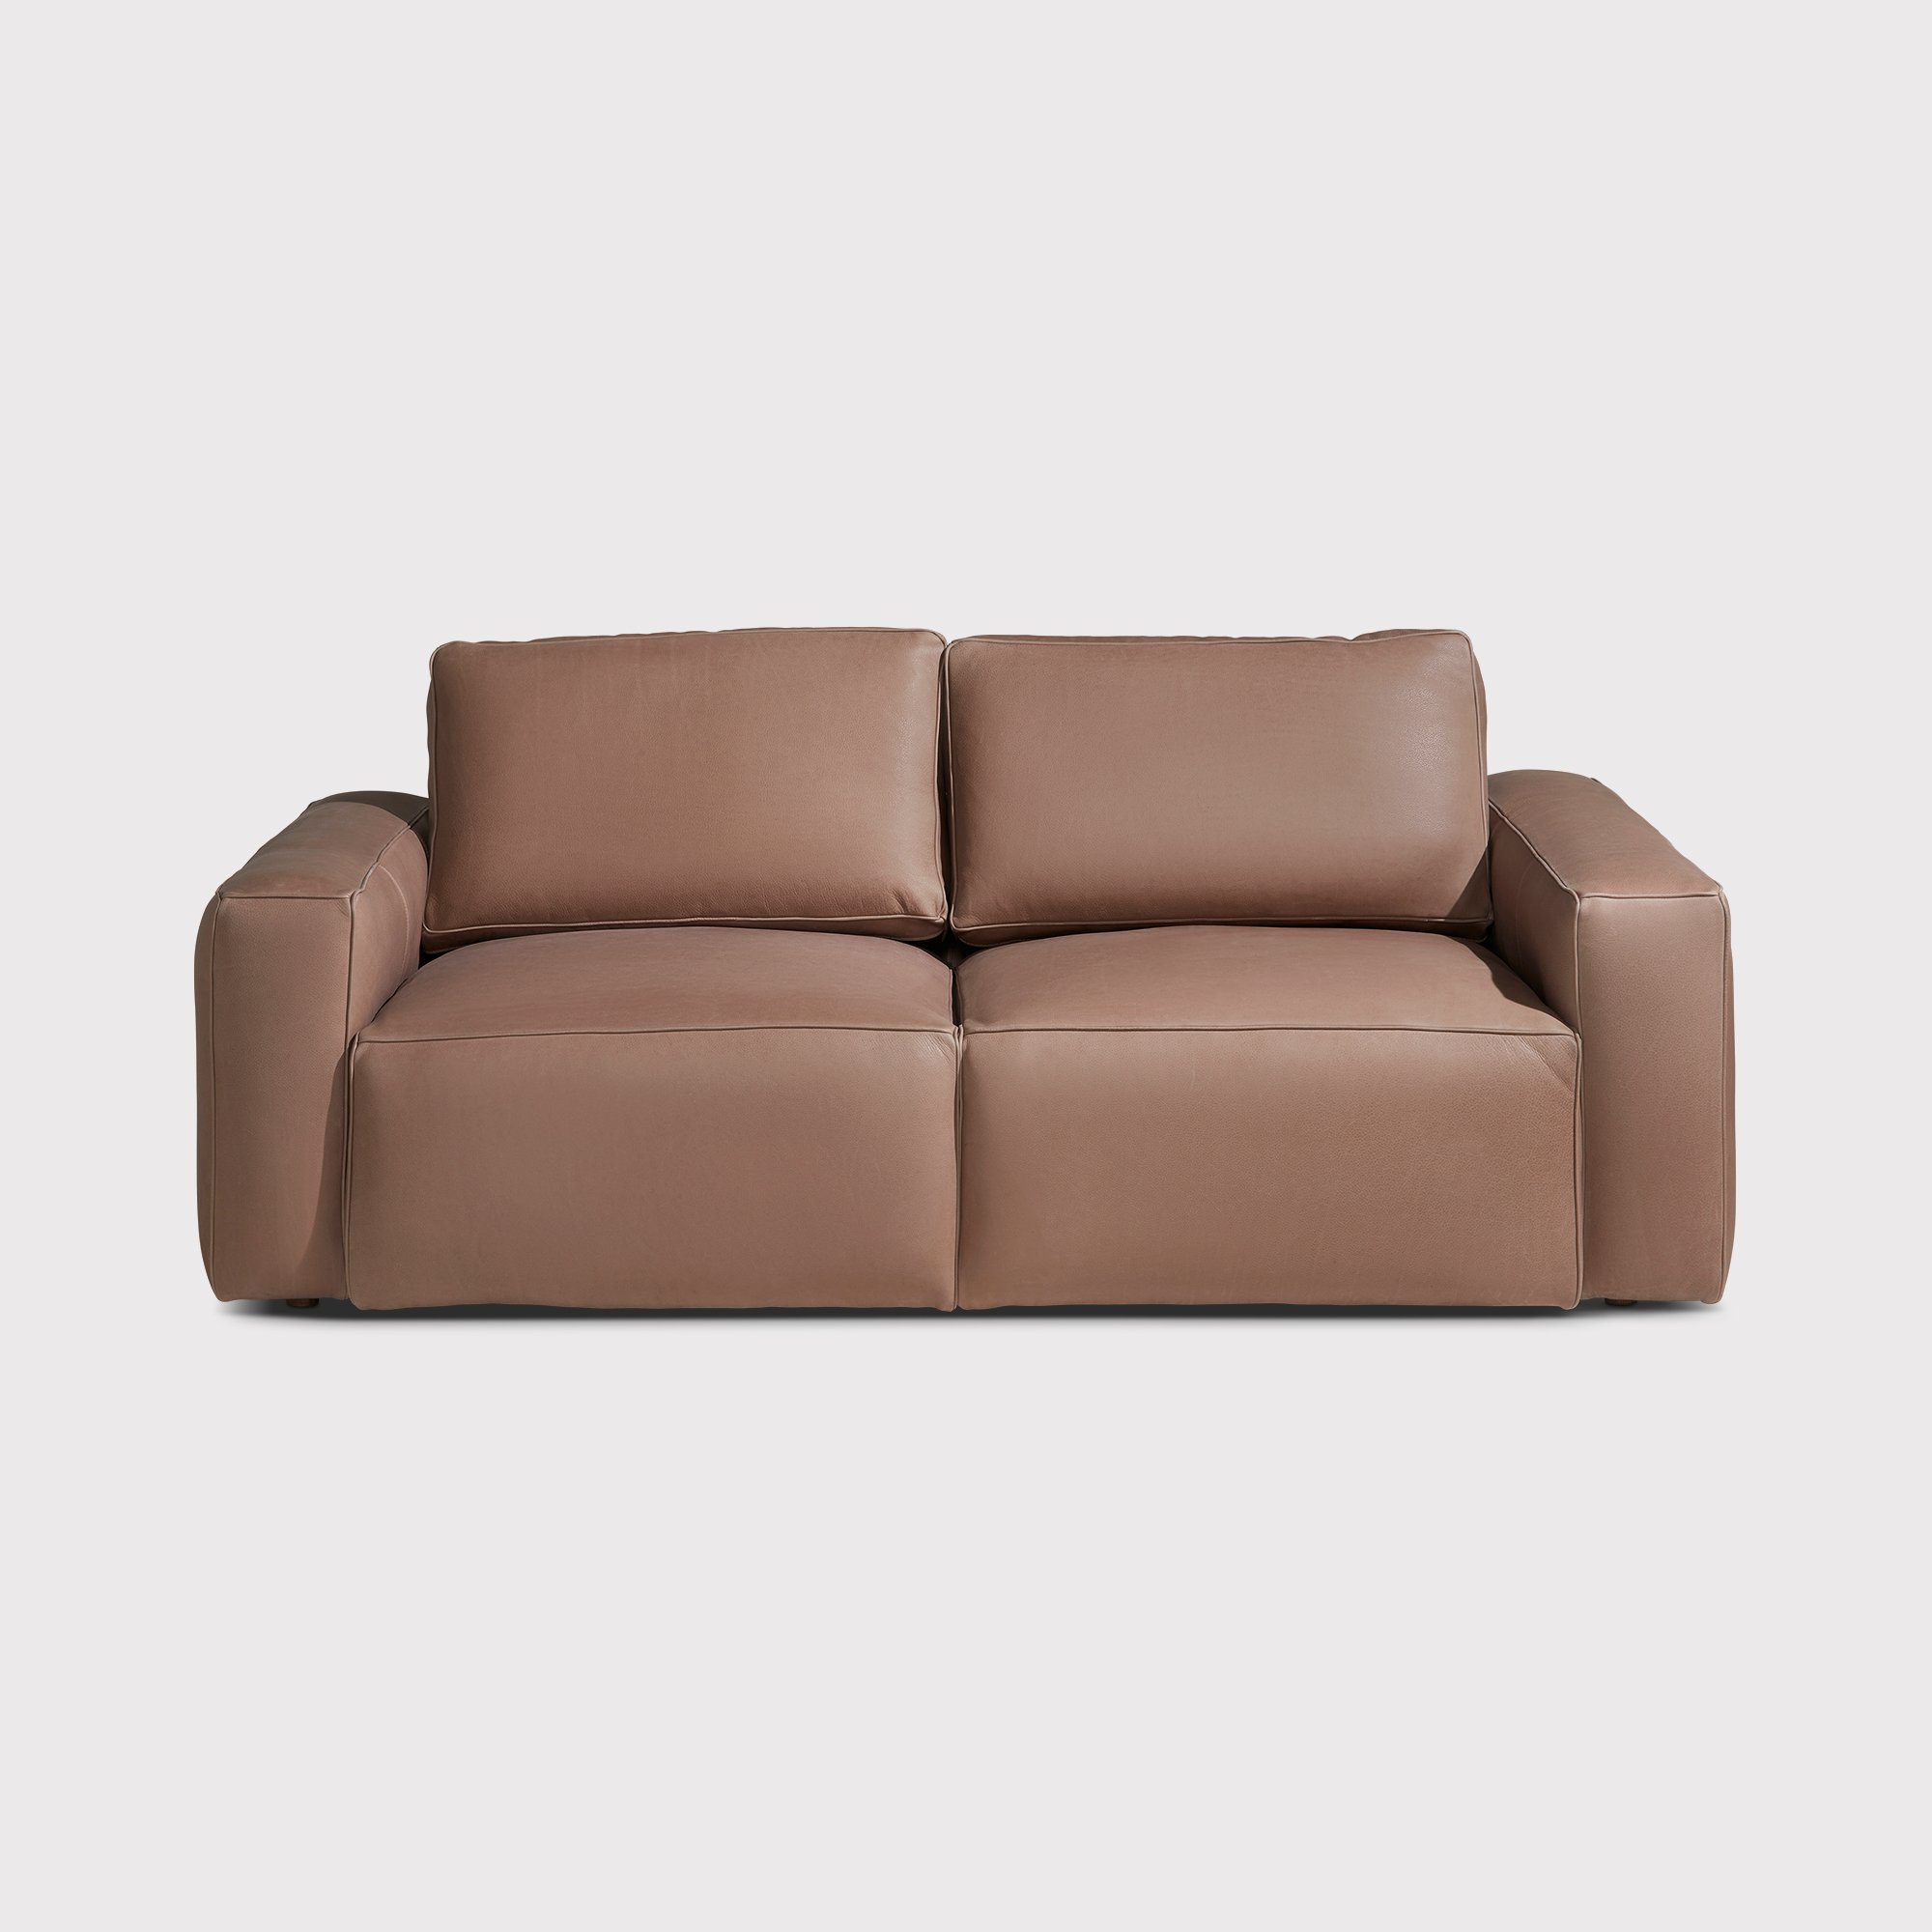 Finsbury 2 Seater Sofa, Brown | Barker & Stonehouse